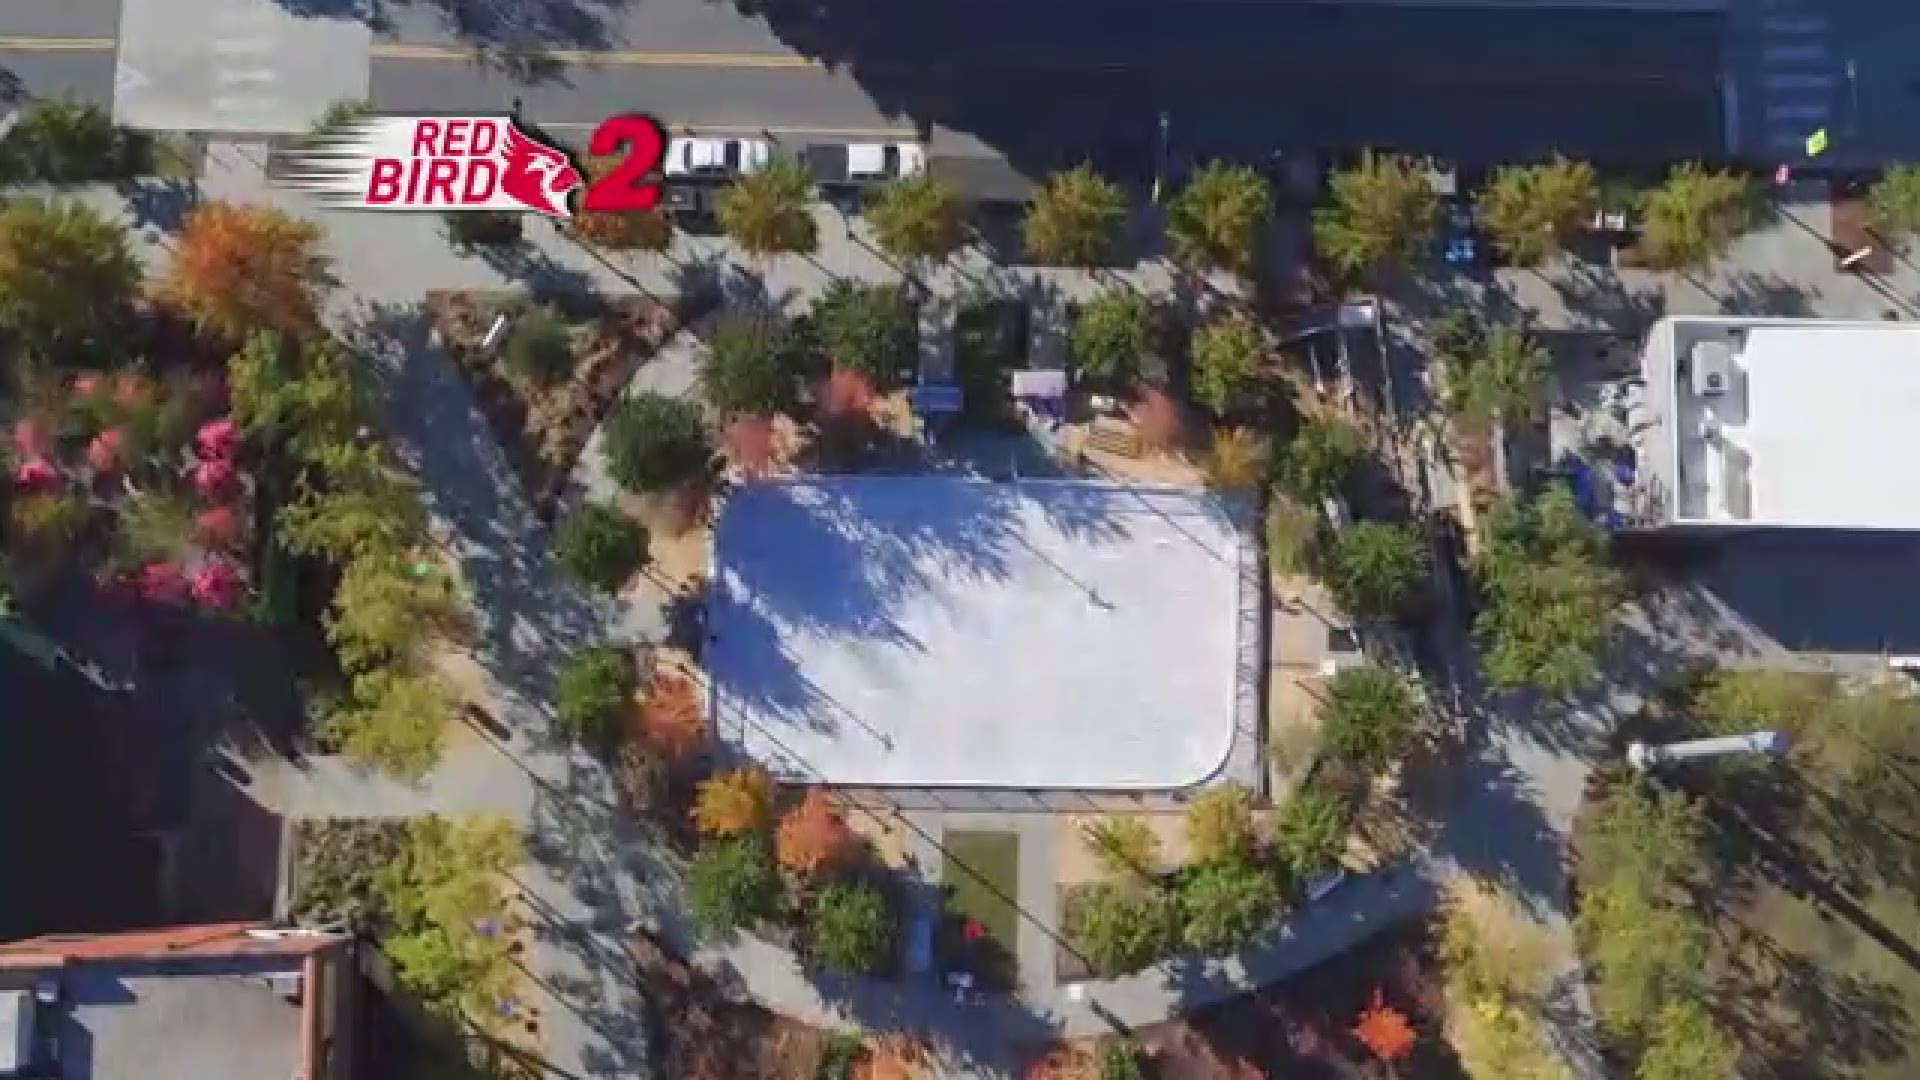 Red Bird 2 captures drone view as crews build WFMY News 2's Winterfest. The season kicks off Friday November 16th in downtown Greensboro.